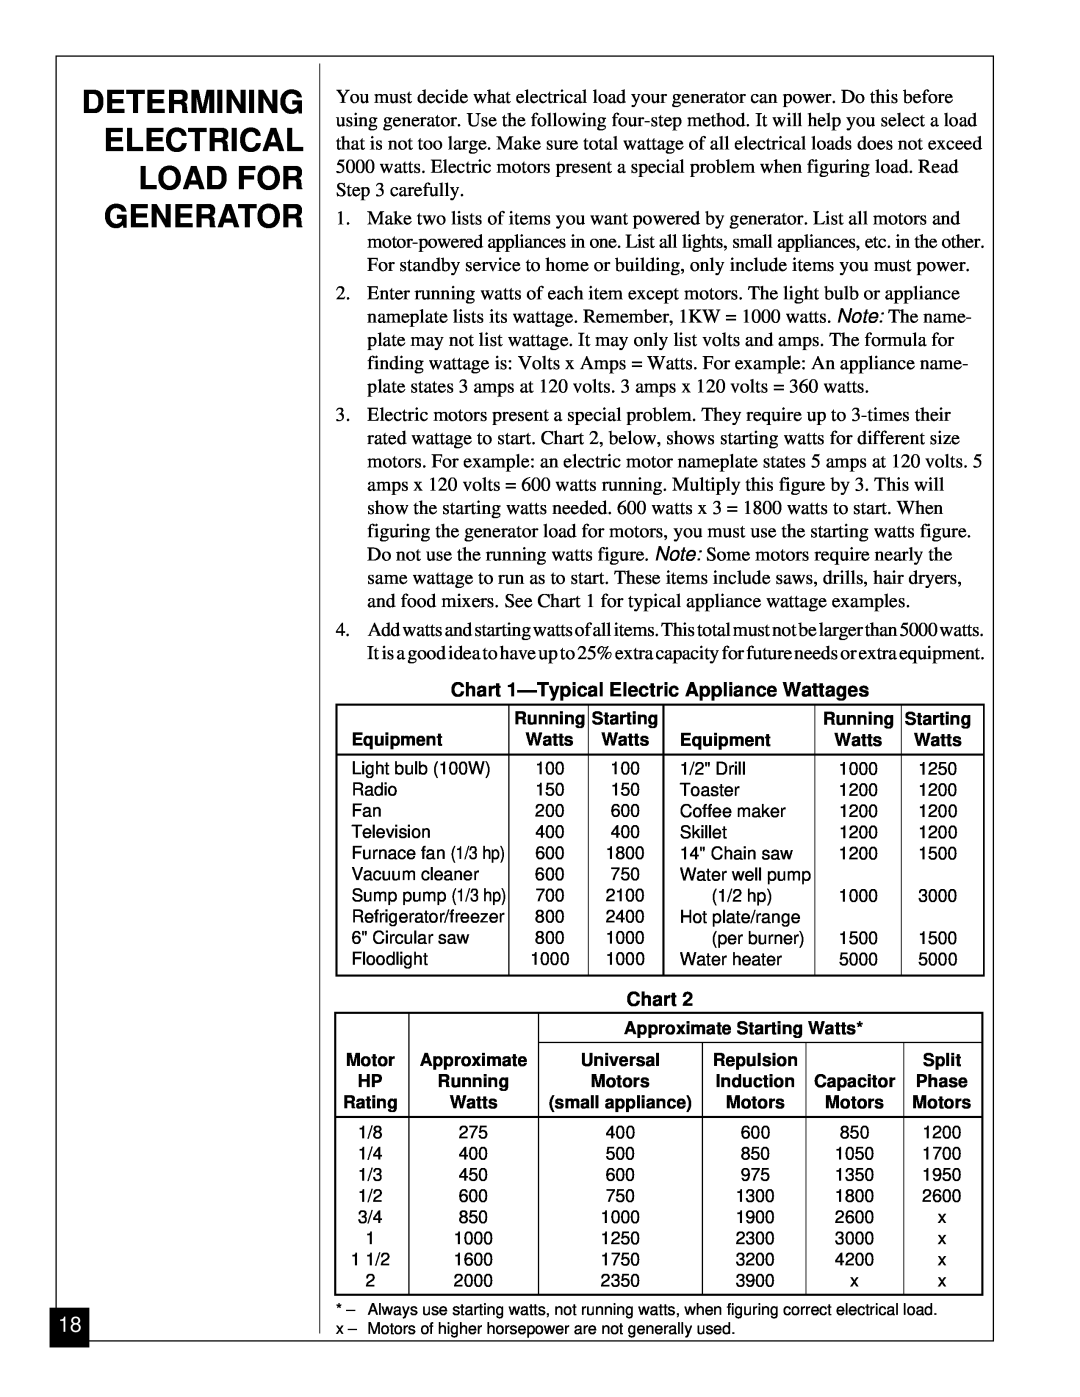 Master Lock MGY5000 Determining Electrical Load For Generator, Chart 1-TypicalElectric Appliance Wattages 